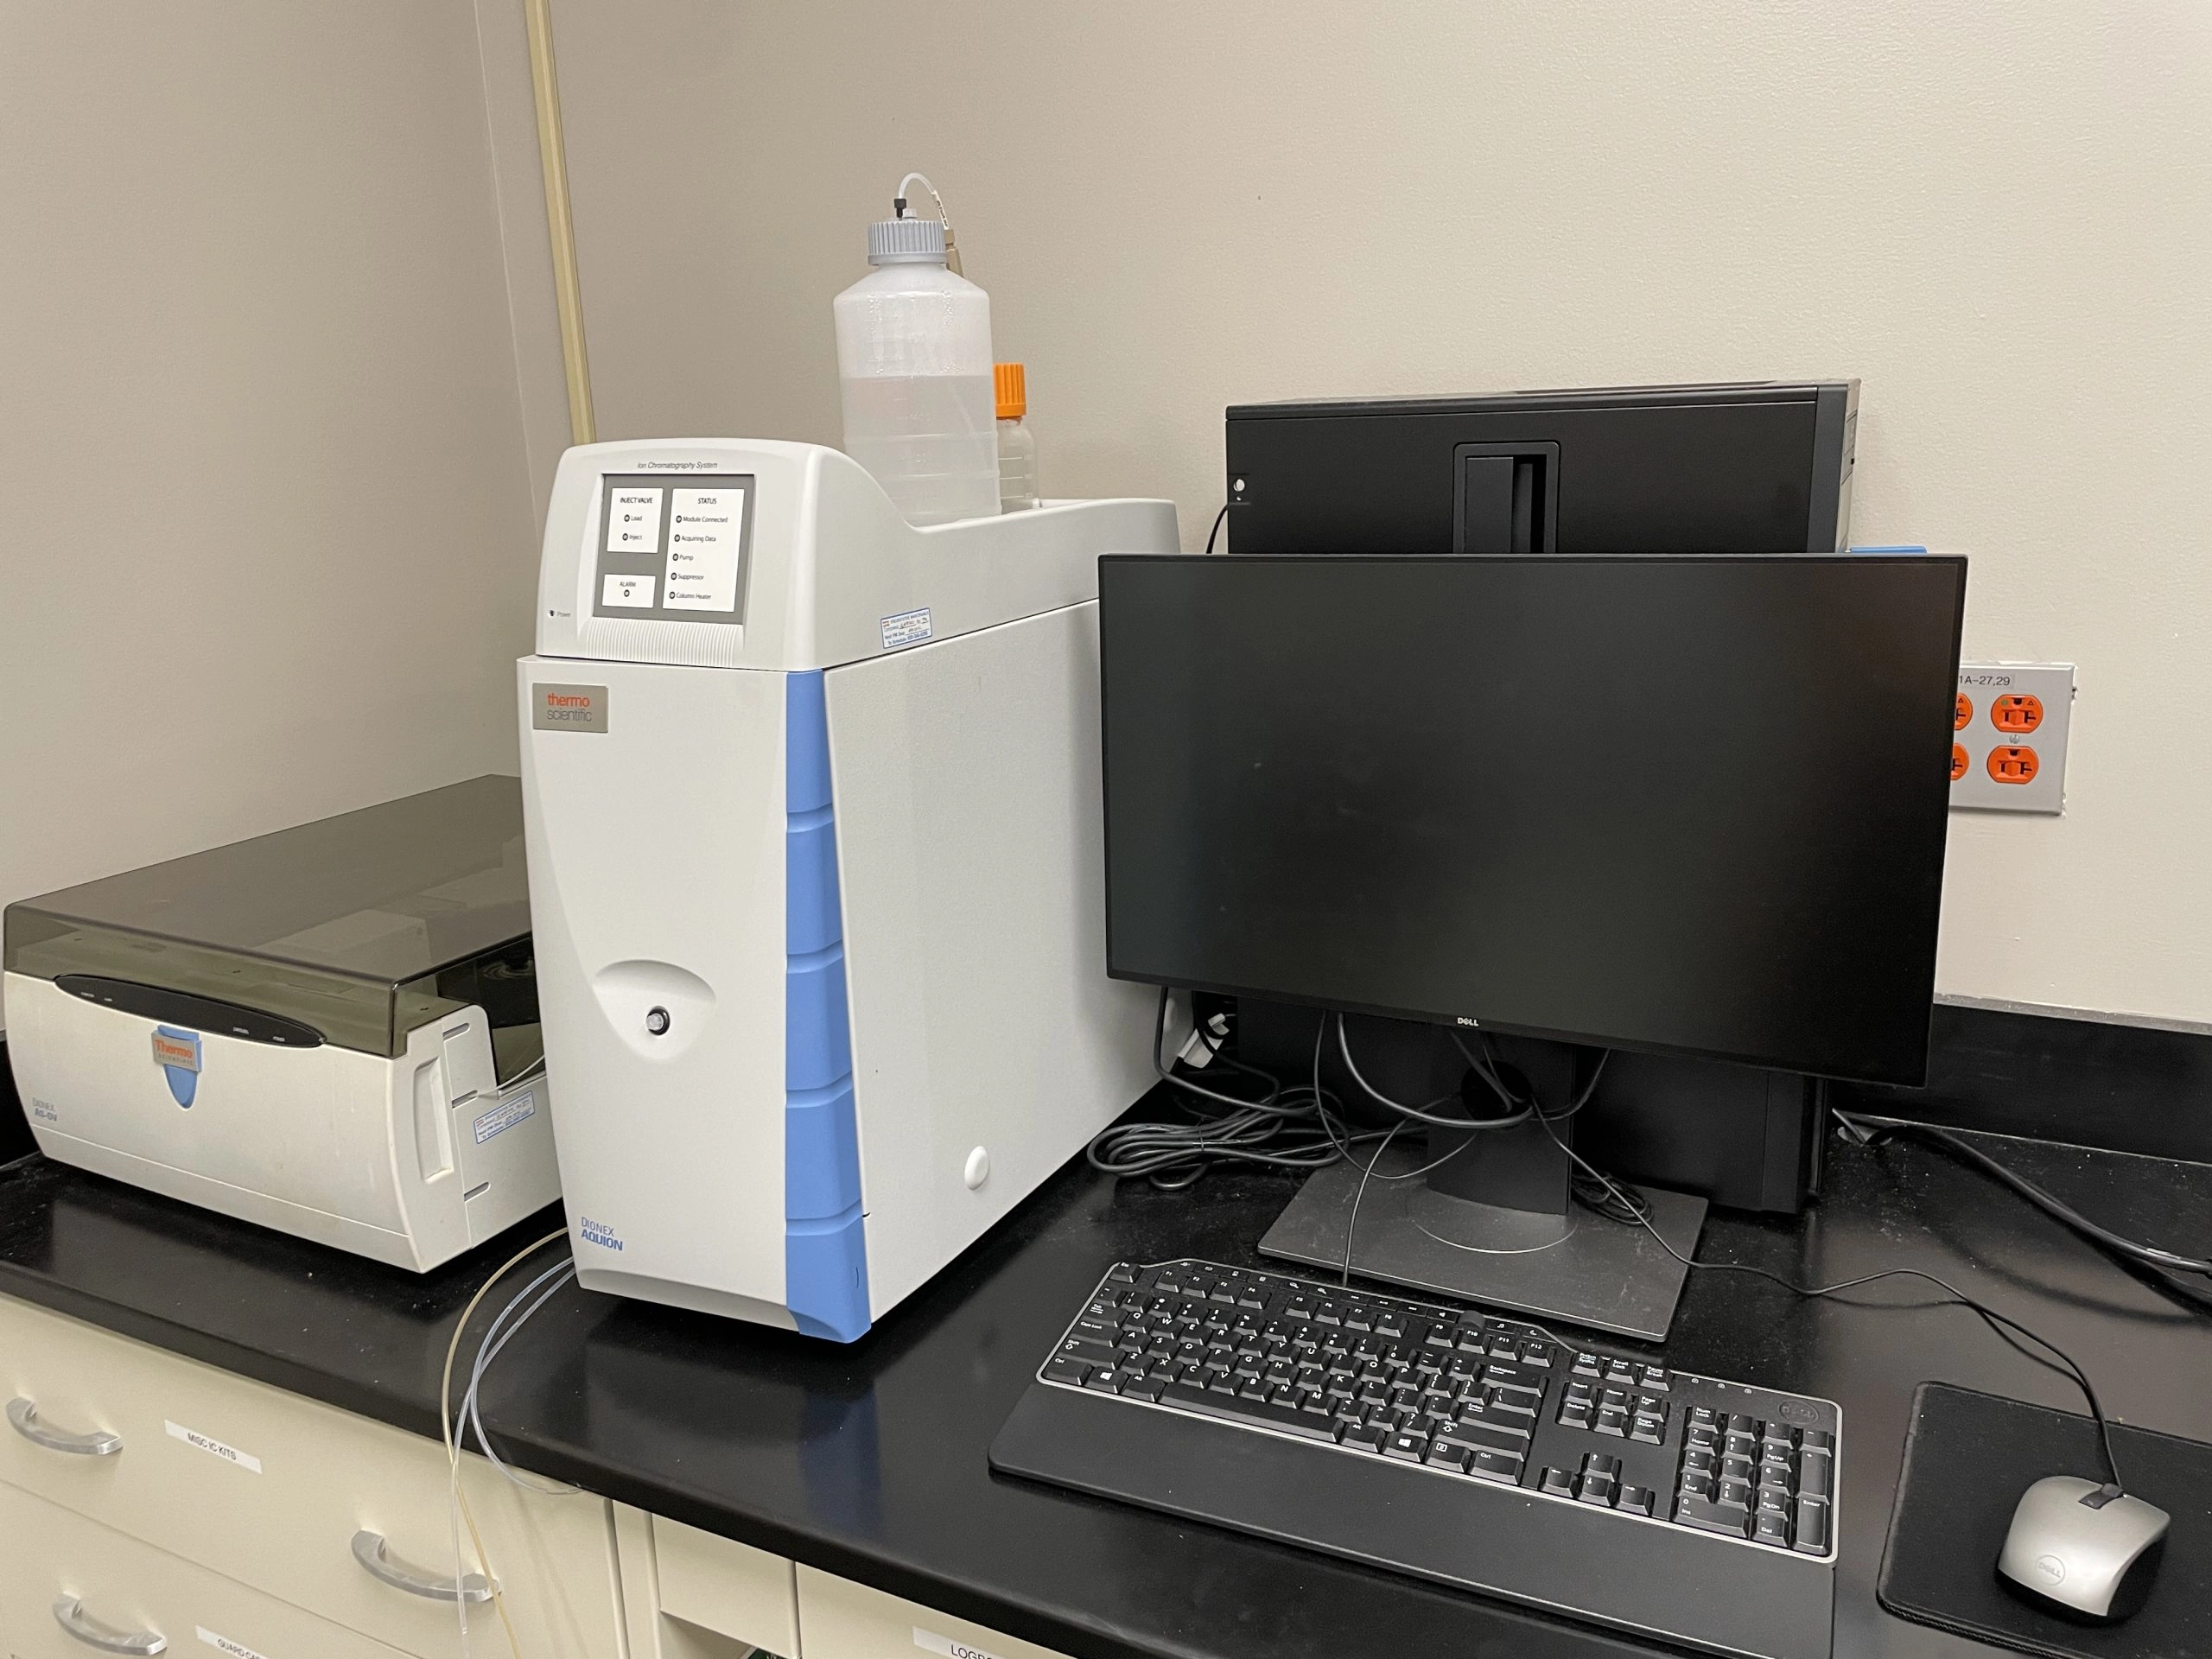 Dionex Aquion Ion Chromatography System and Dionex AS-DV Autosampler